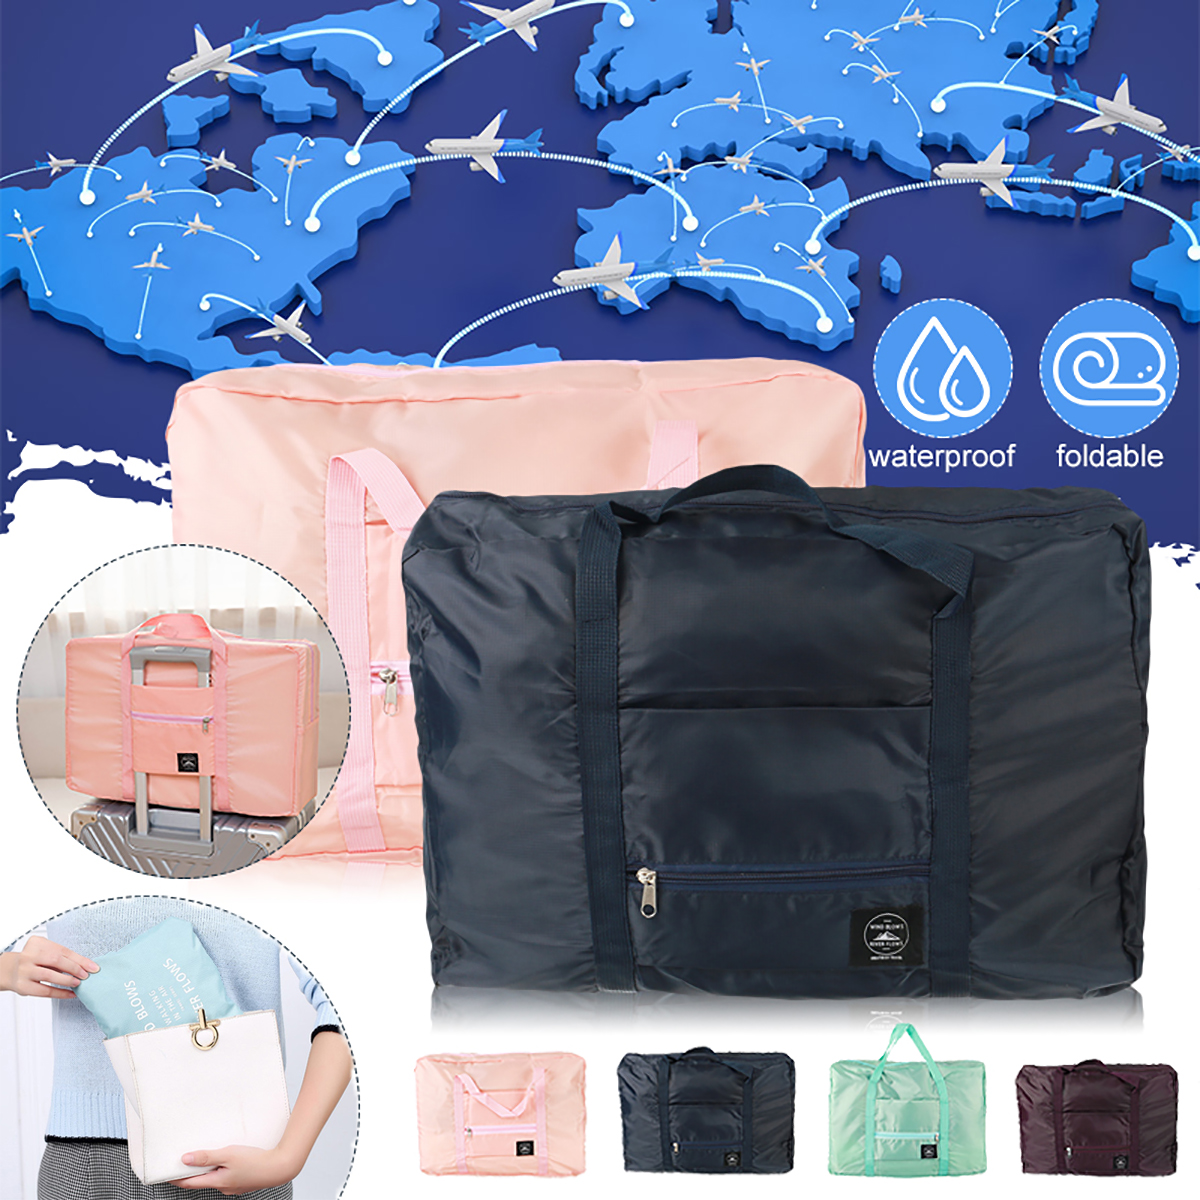 420D-Waterpoof-Folding-Travel-Luggage-Storage-Bags-Portable-Outdoor-Camping-Carry-On-Duffle-Bag-1790767-2